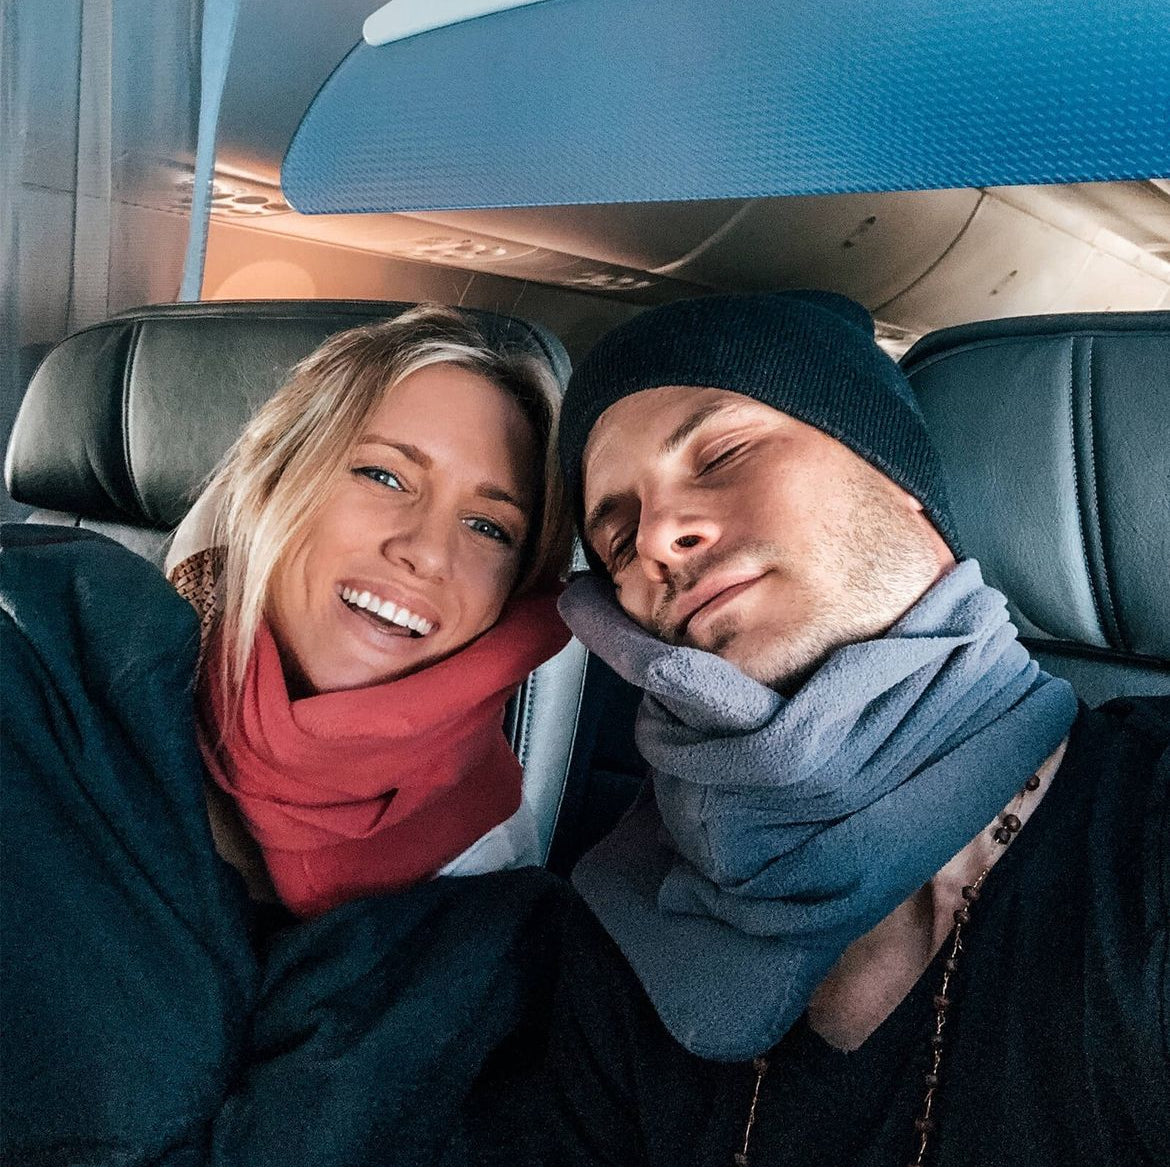 NeckBuddy - The Perfect Travel Pillow